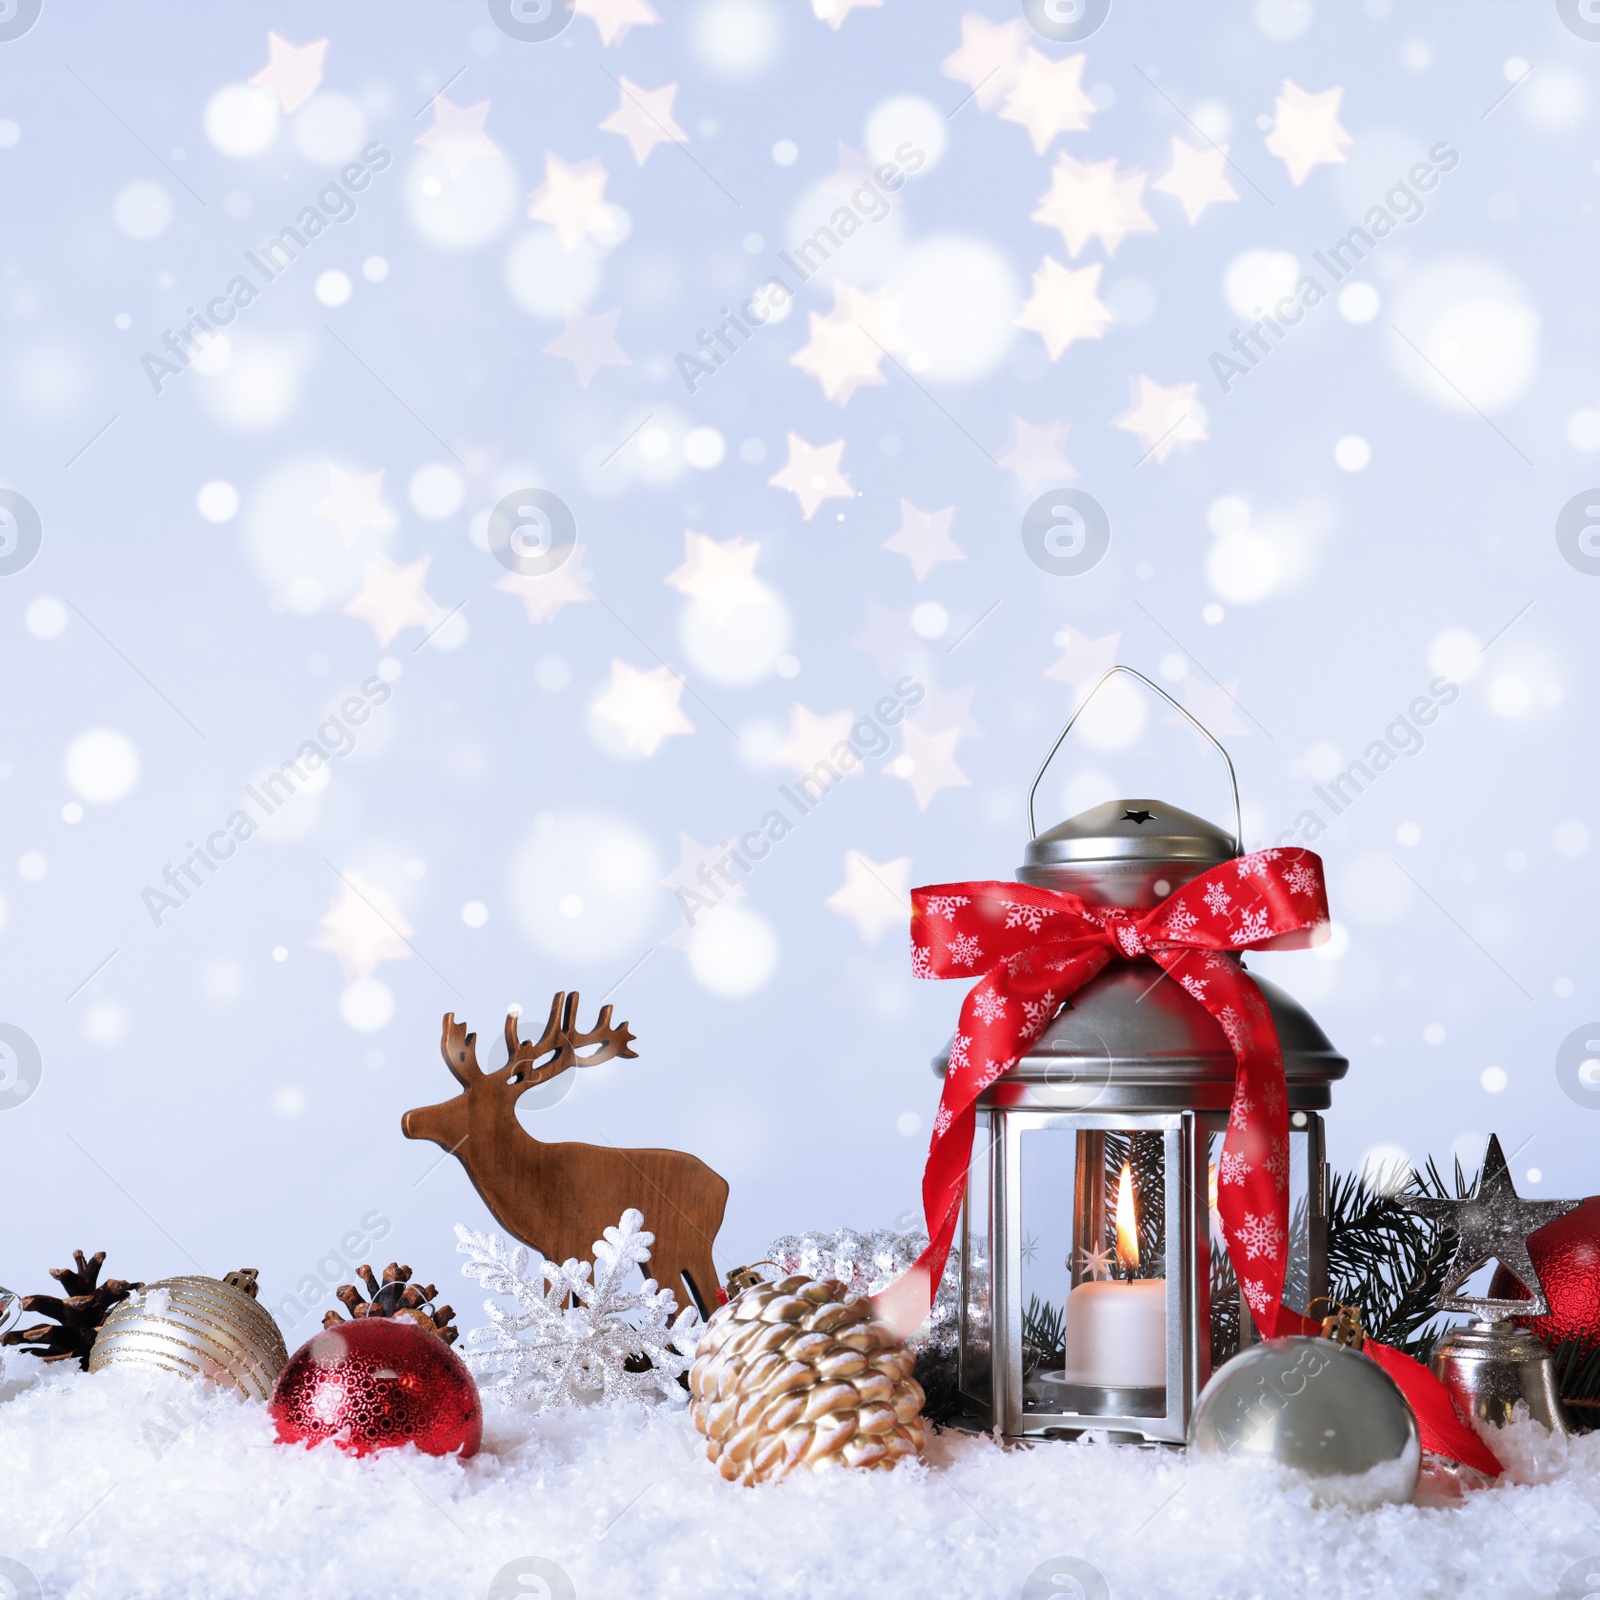 Image of Composition with Christmas lantern on snow. Bokeh effect